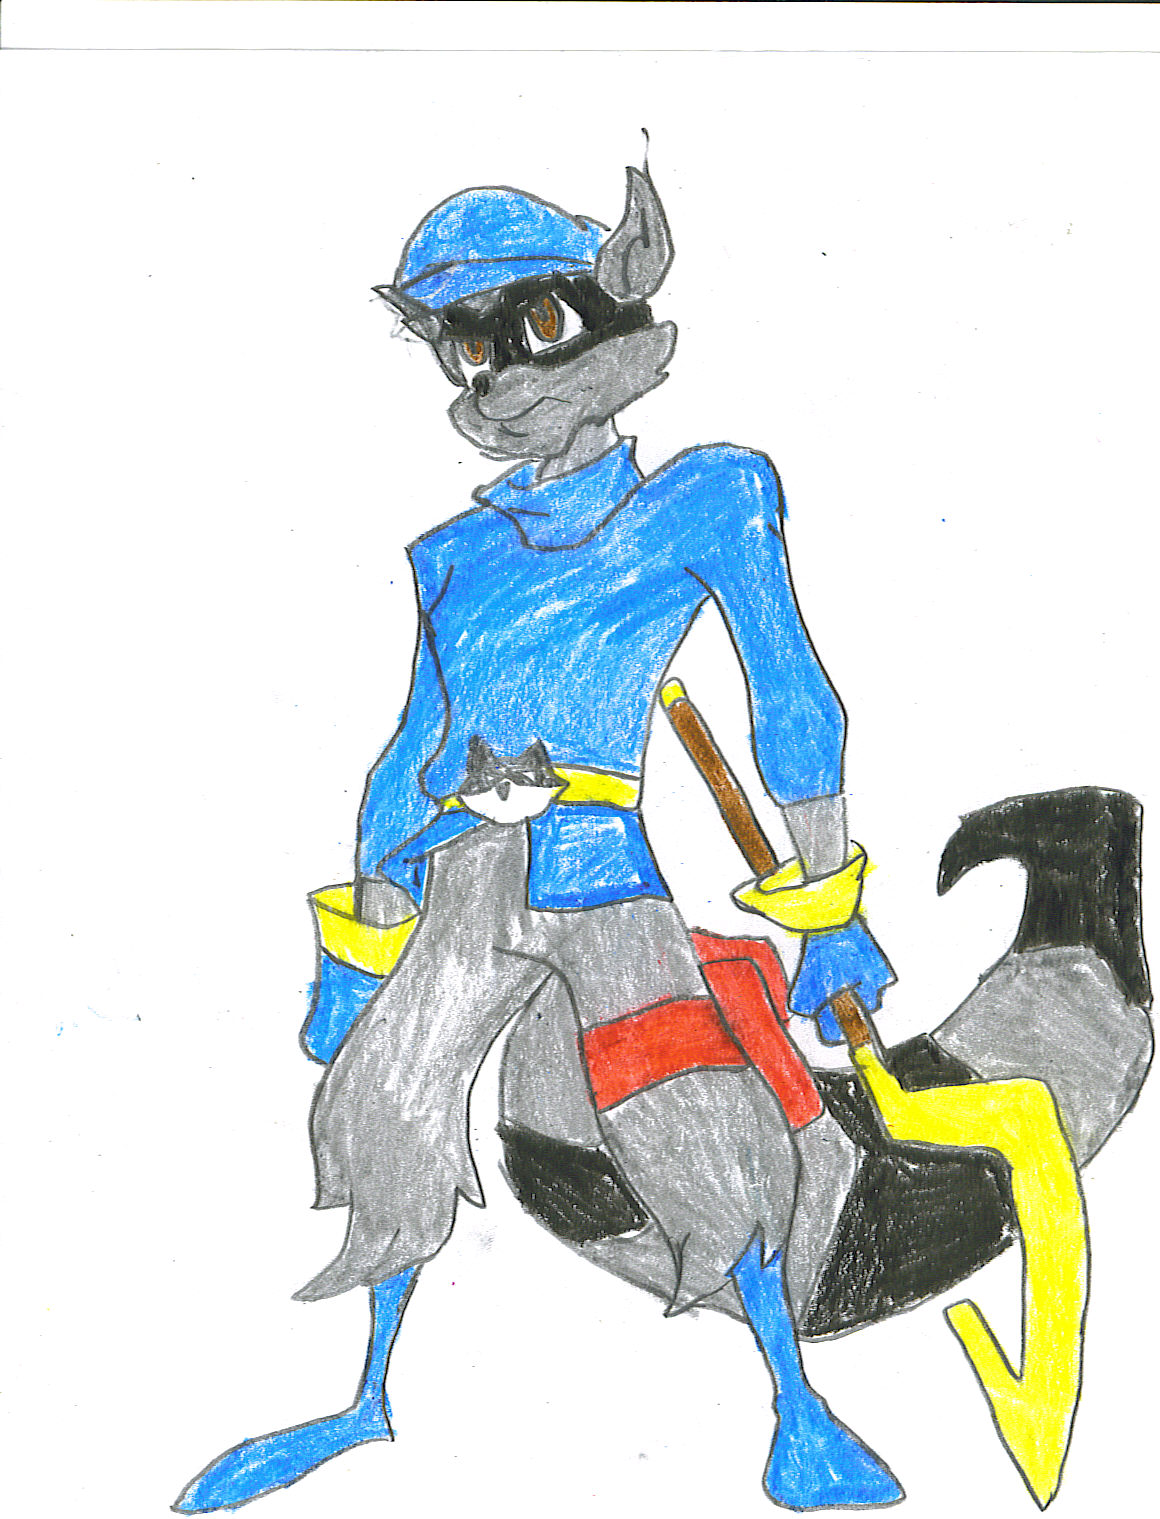 sly cooper by yumisatare11